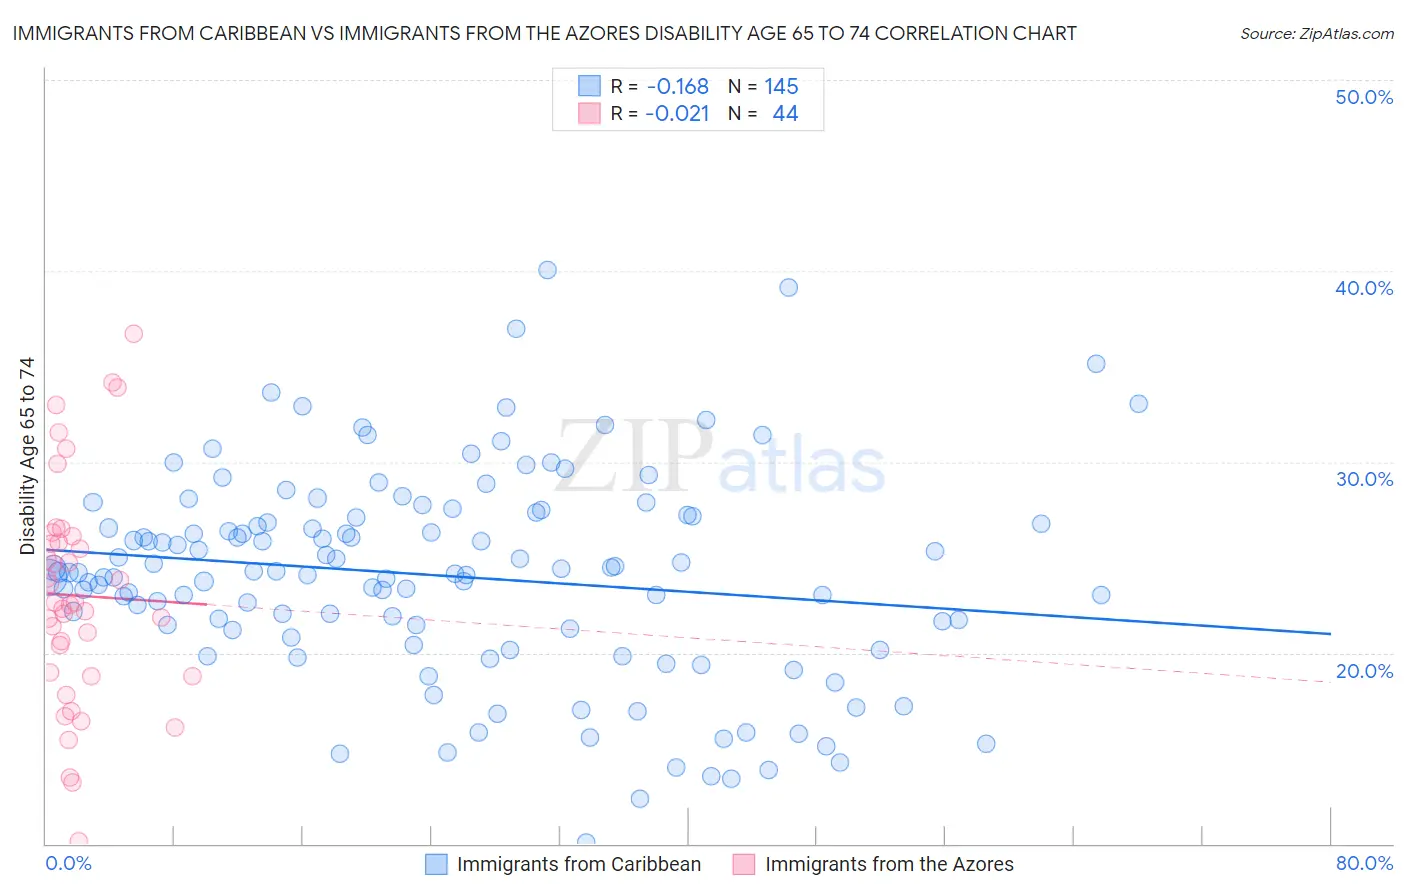 Immigrants from Caribbean vs Immigrants from the Azores Disability Age 65 to 74